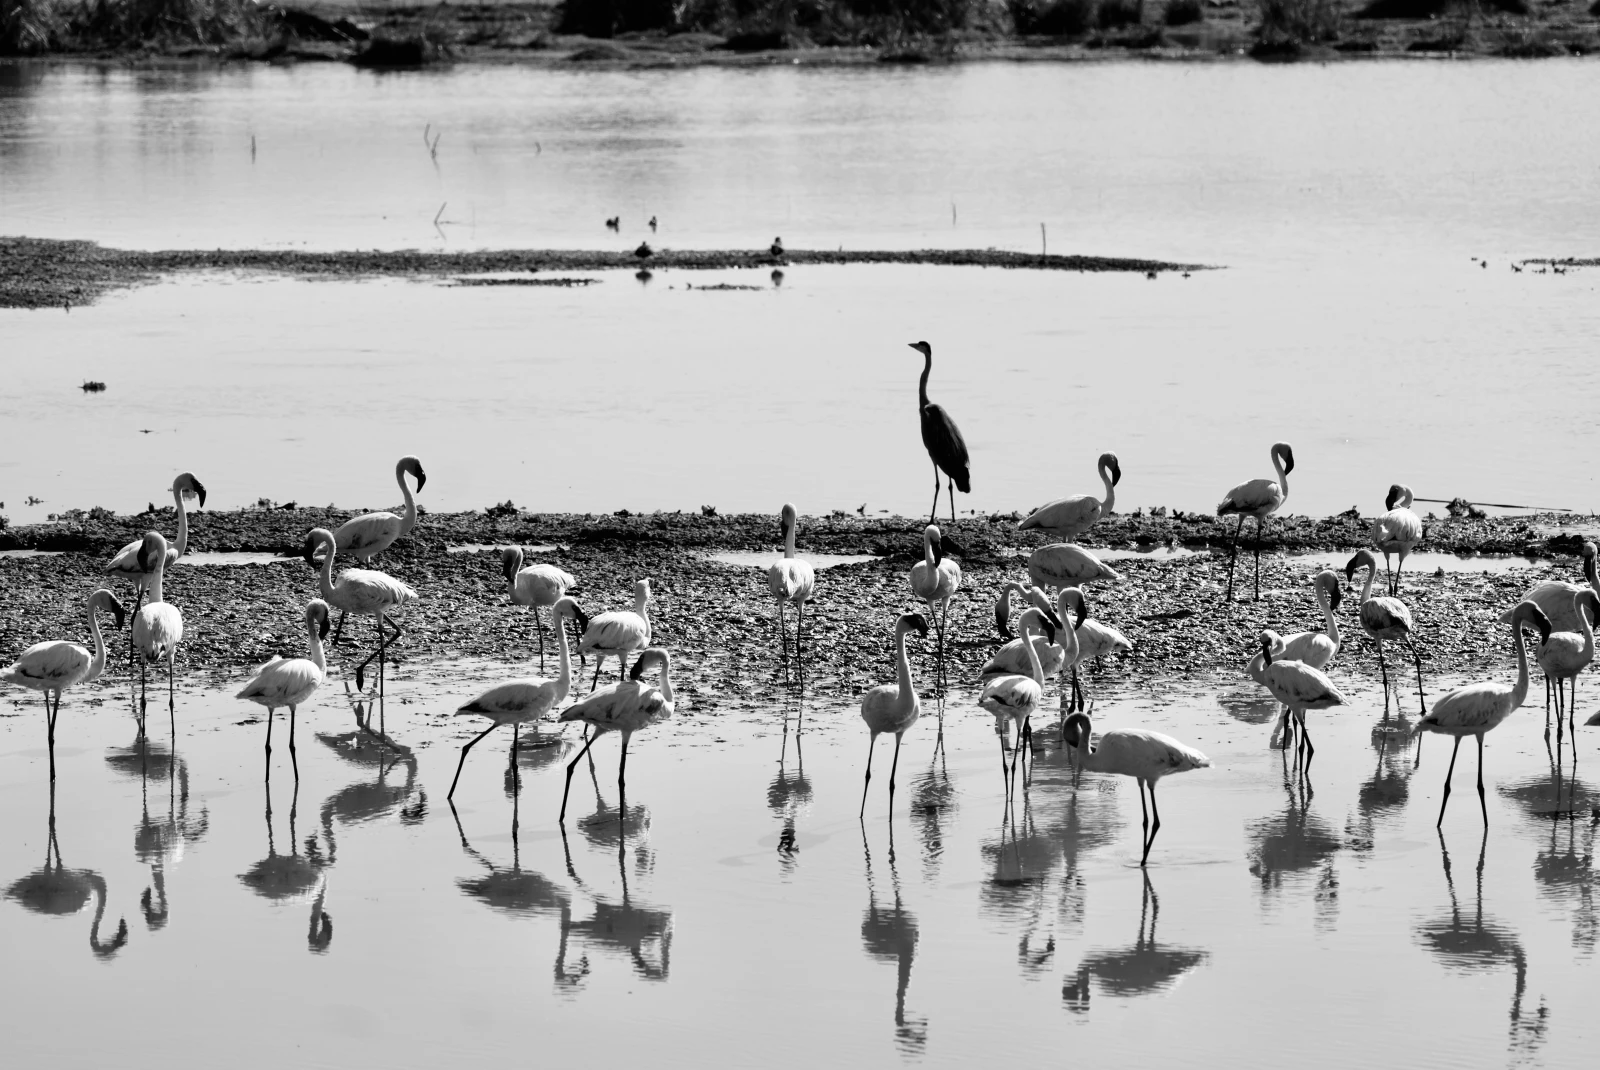 Wild tall birds standing in a pond with stones and reflections